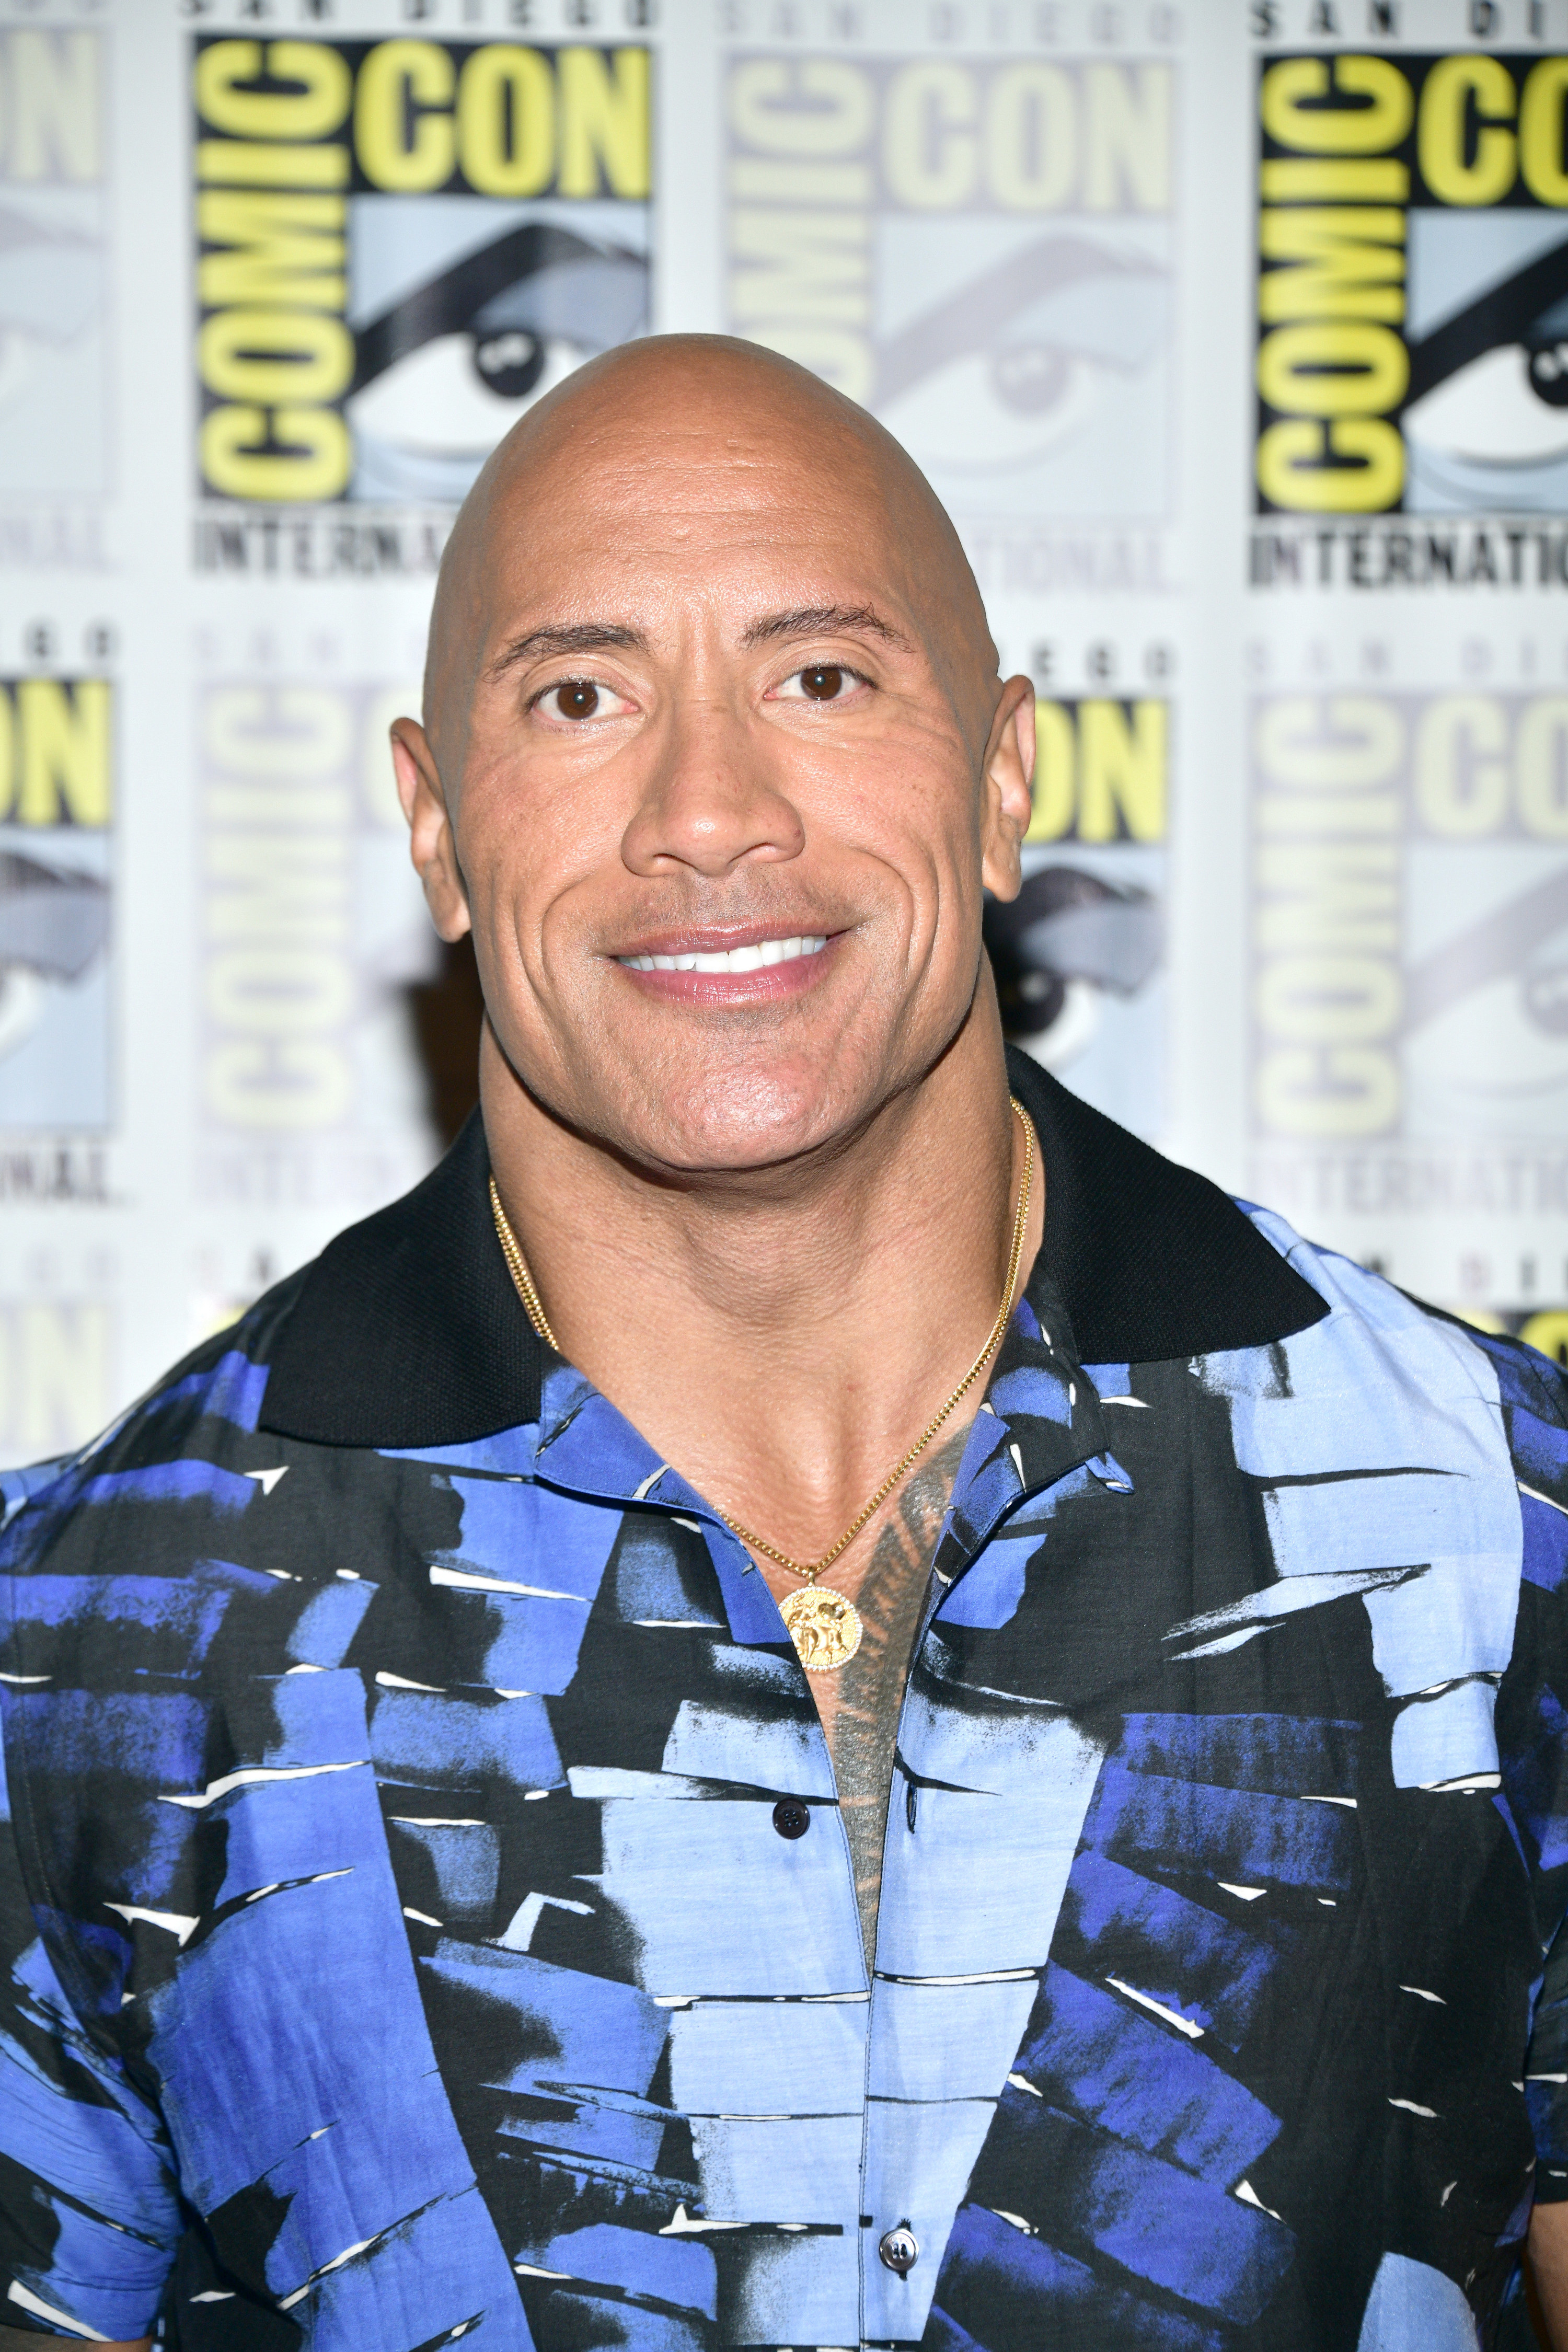 The Rock at San Diego Comic Con 2022